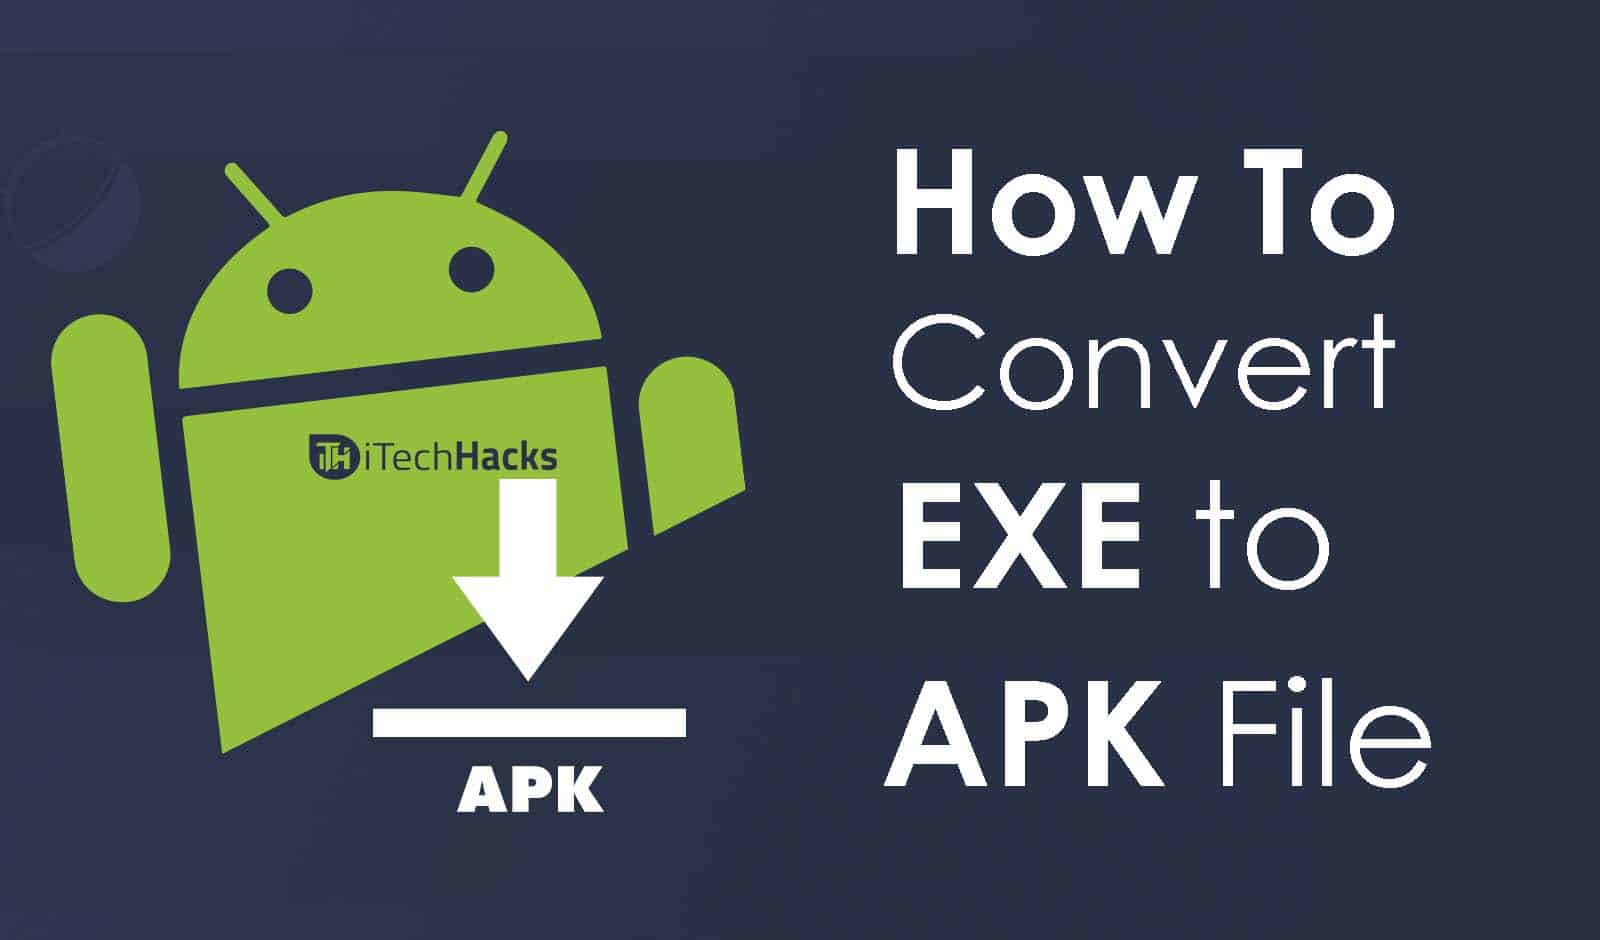 exe to apk converter only wrong